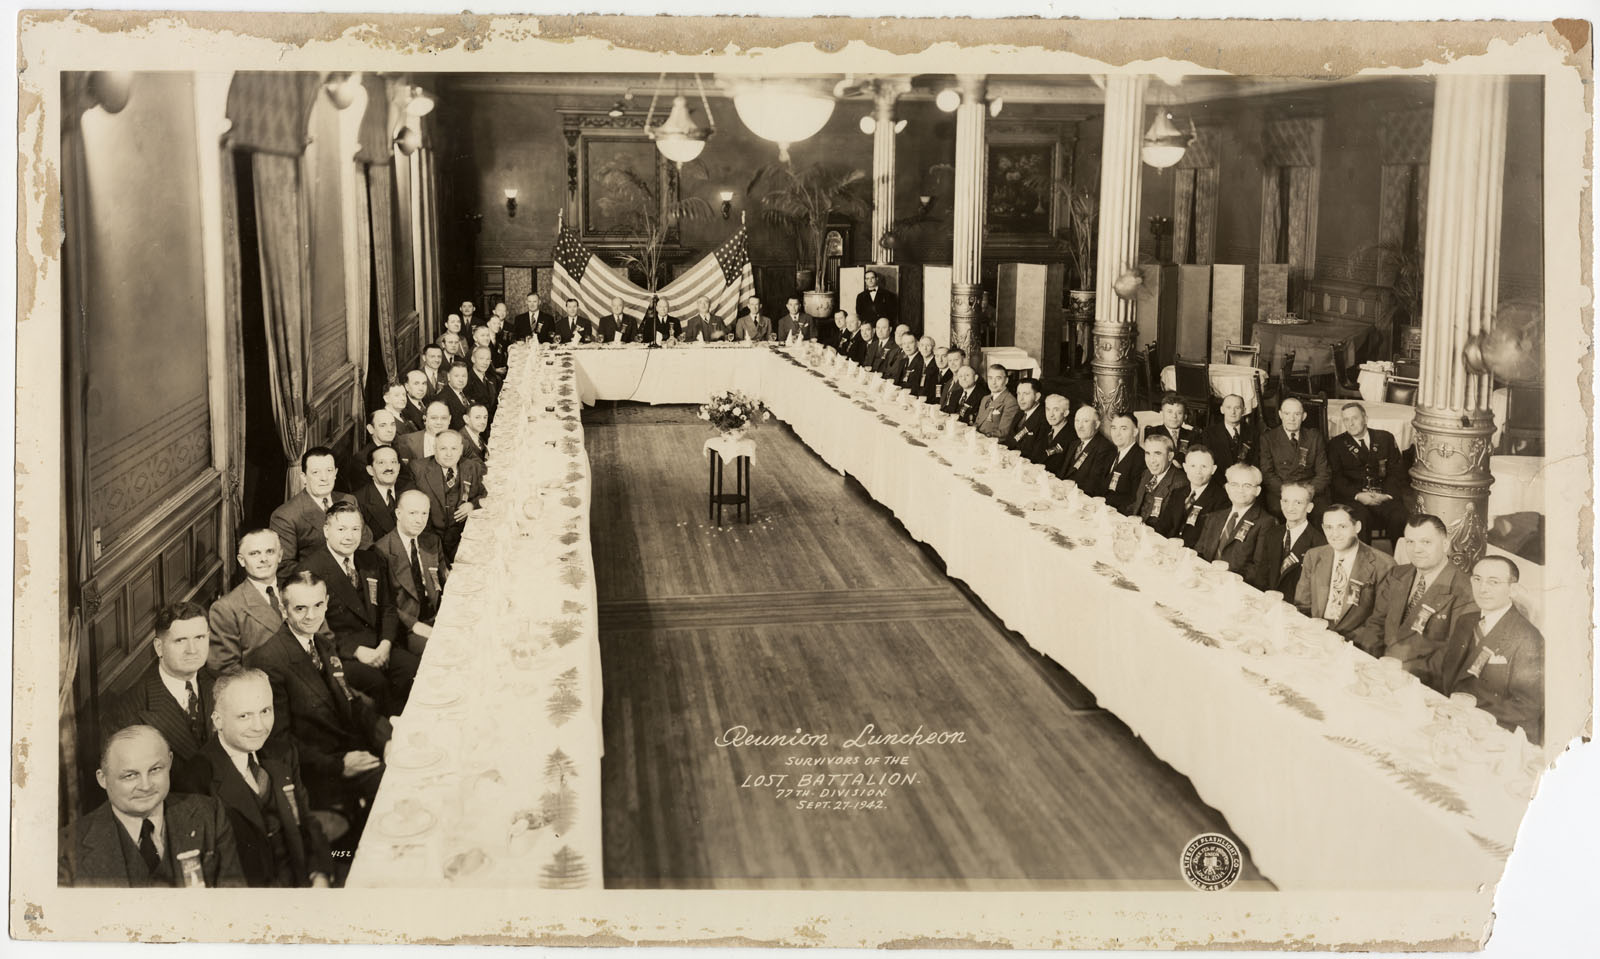 Sephia photograph of a very large group of men seated at long banquet tables